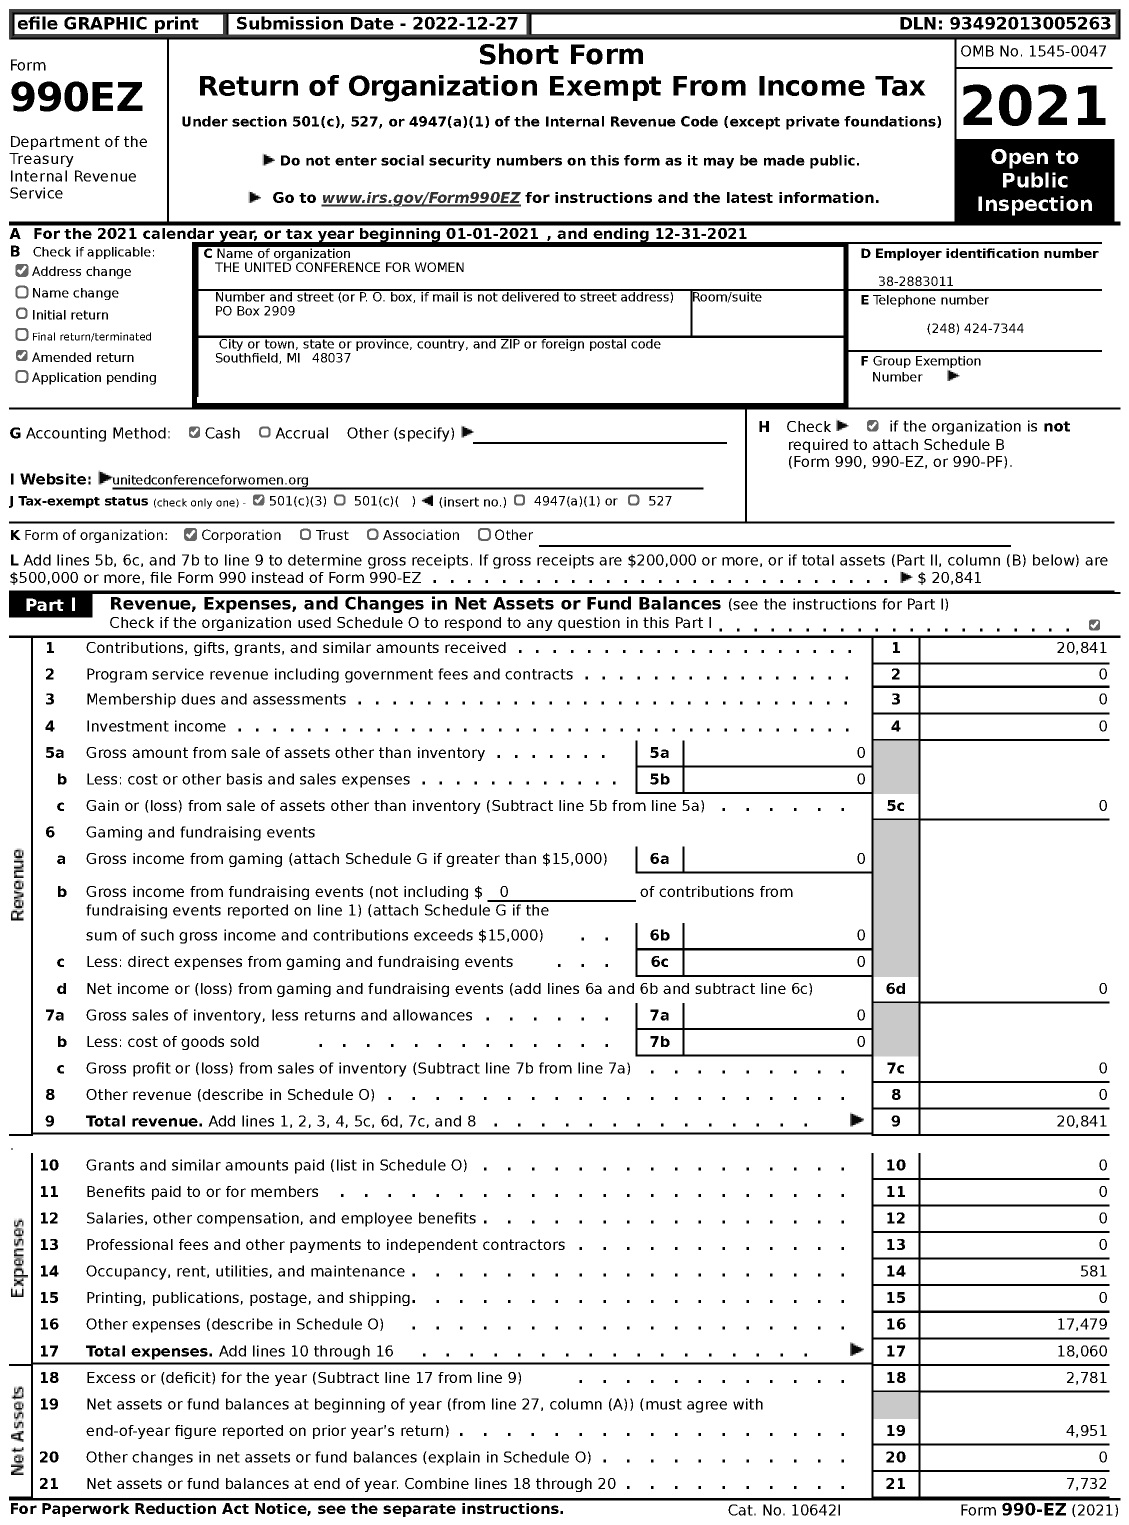 Image of first page of 2021 Form 990EZ for The United Conference for Women